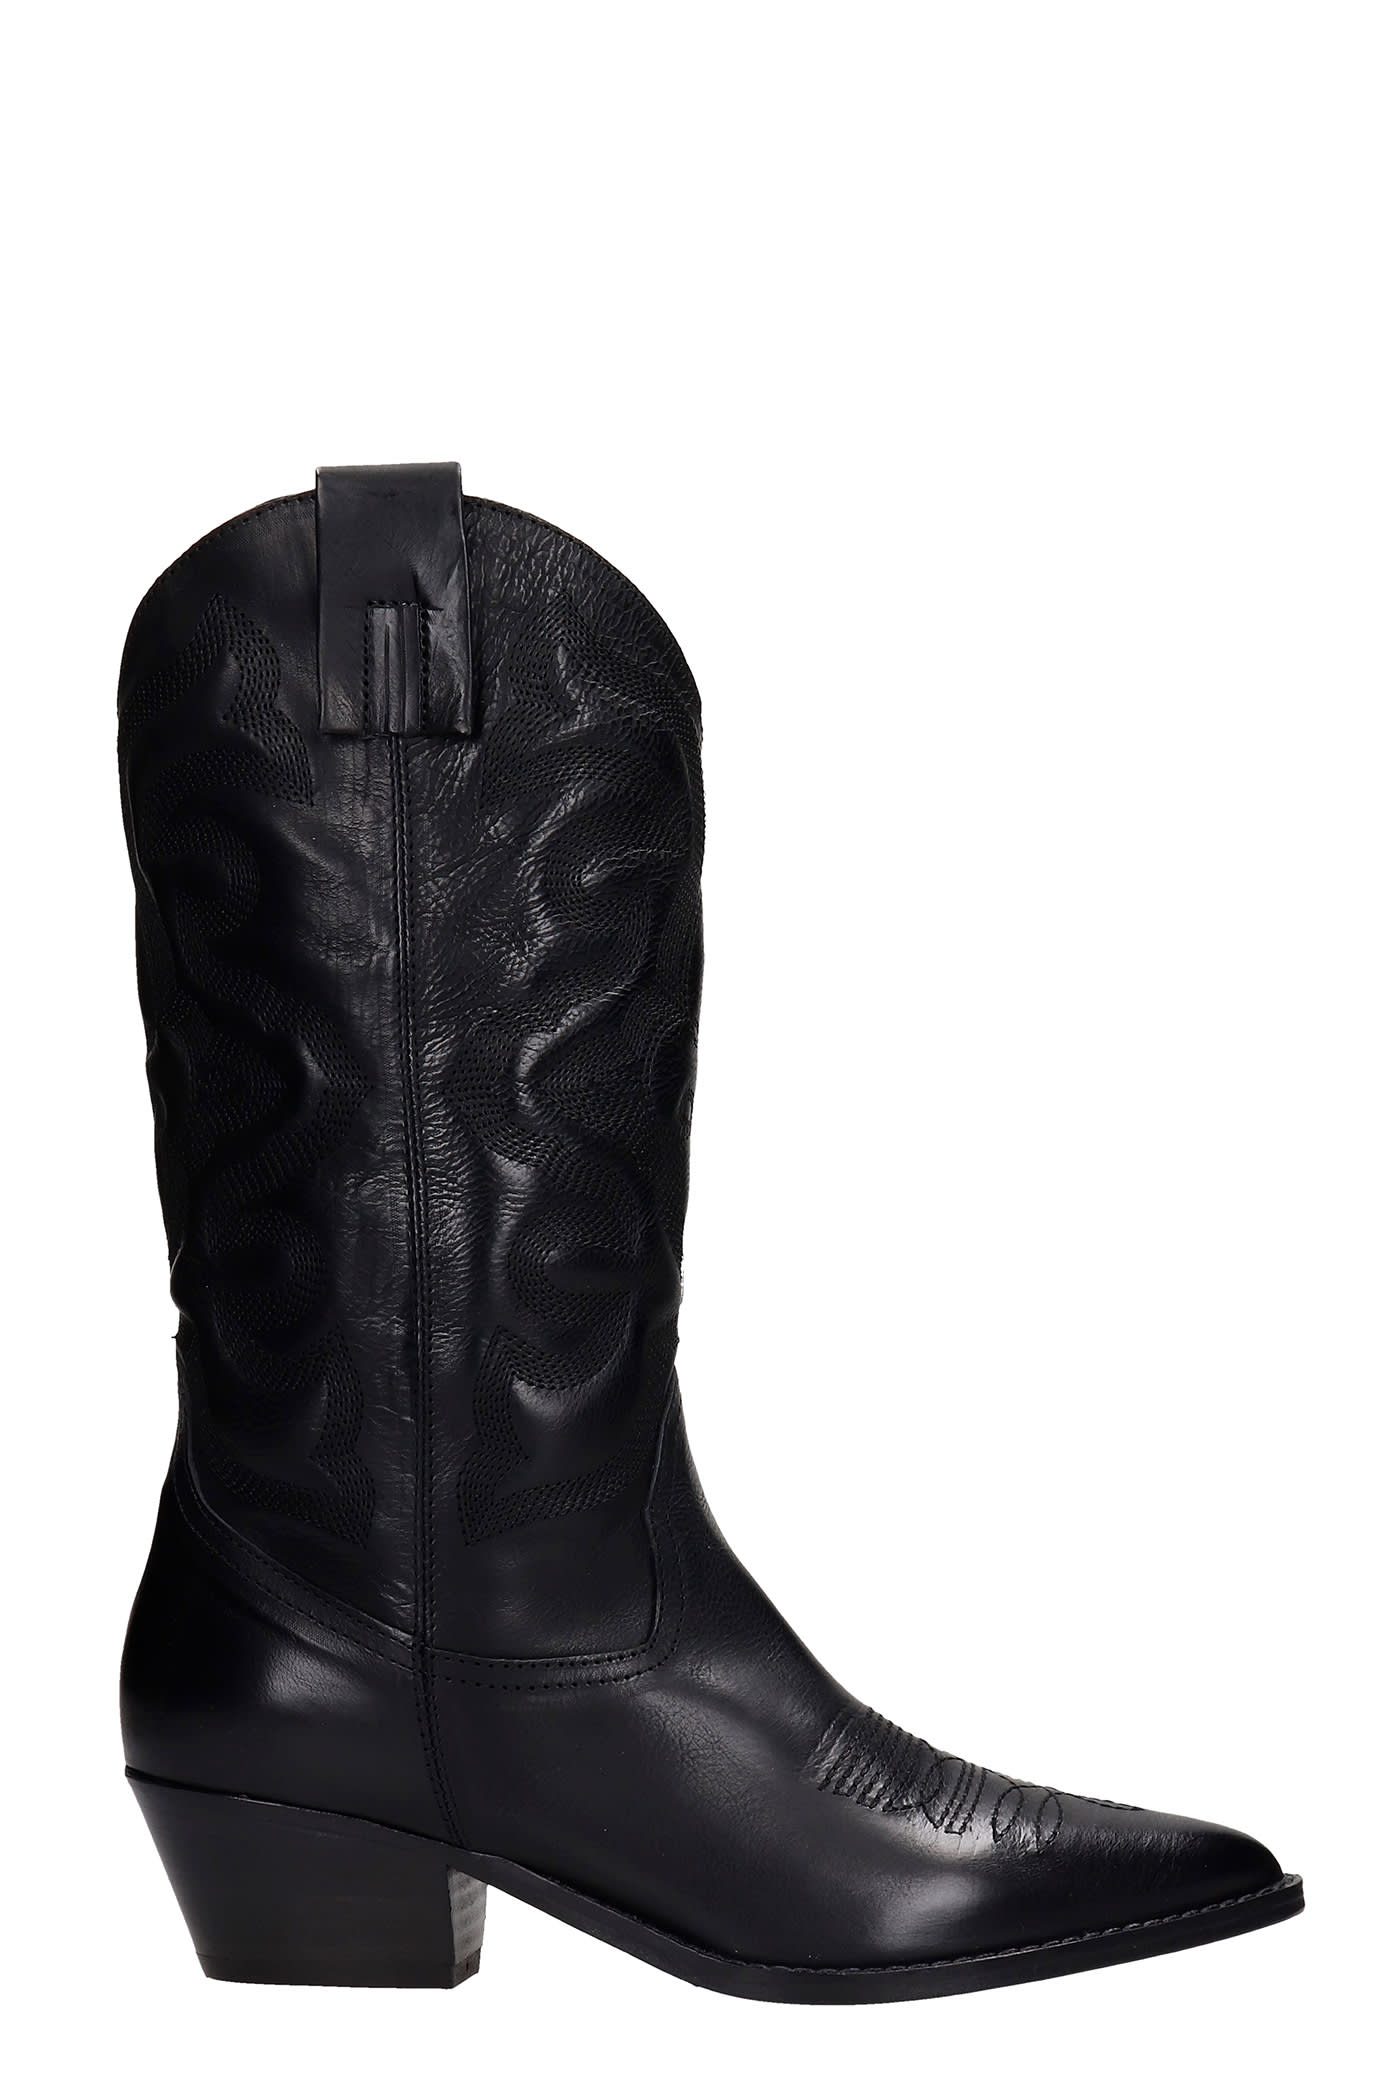 Julie Dee Texan Boots In Black Leather